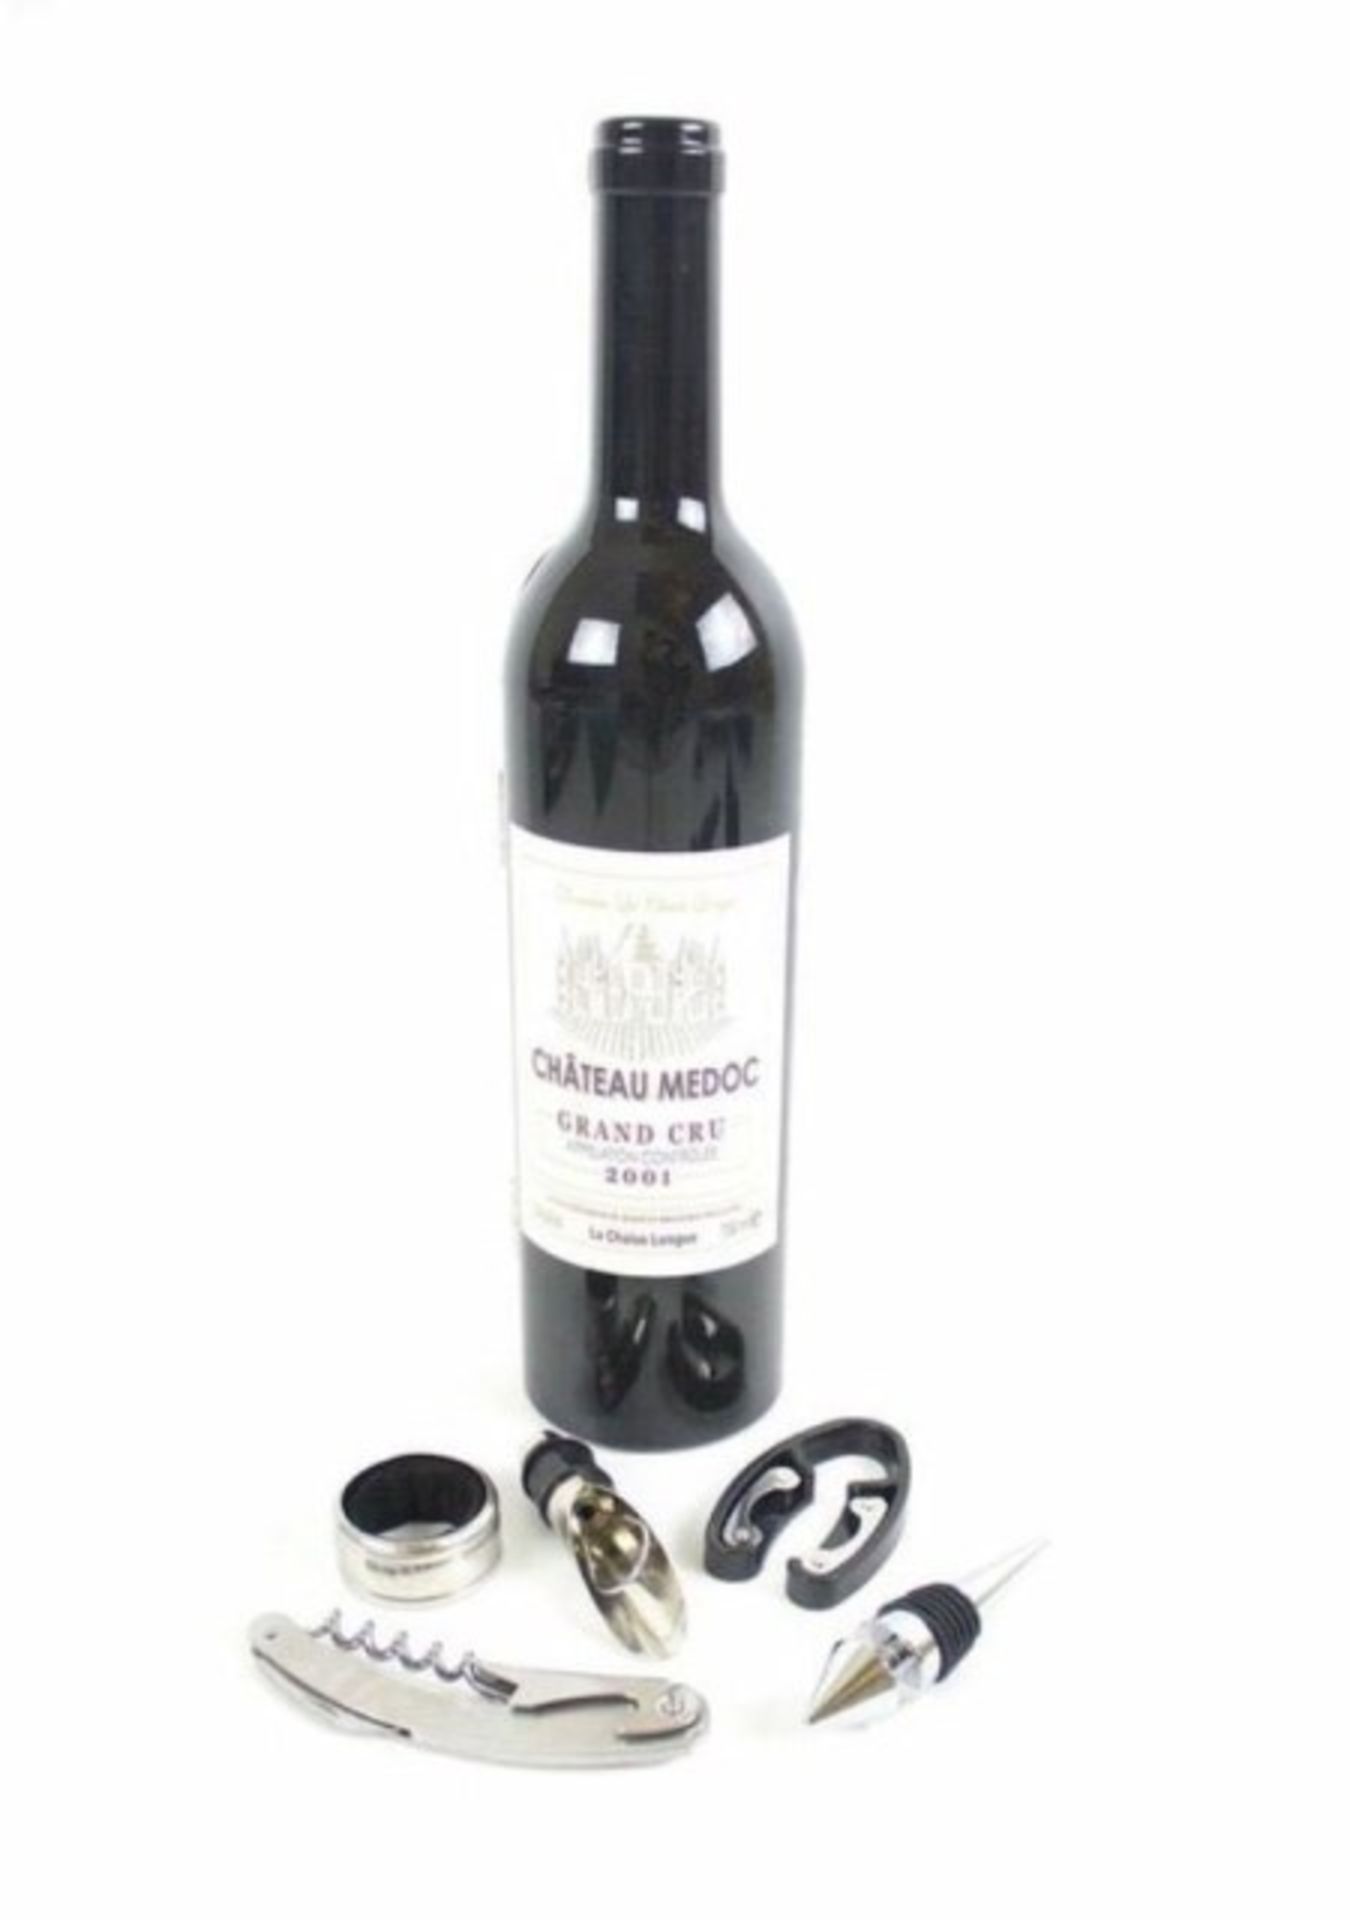 V *TRADE QTY* Brand New Boxed Wine Connoisseurs Gift Set X 7 YOUR BID PRICE TO BE MULTIPLIED BY